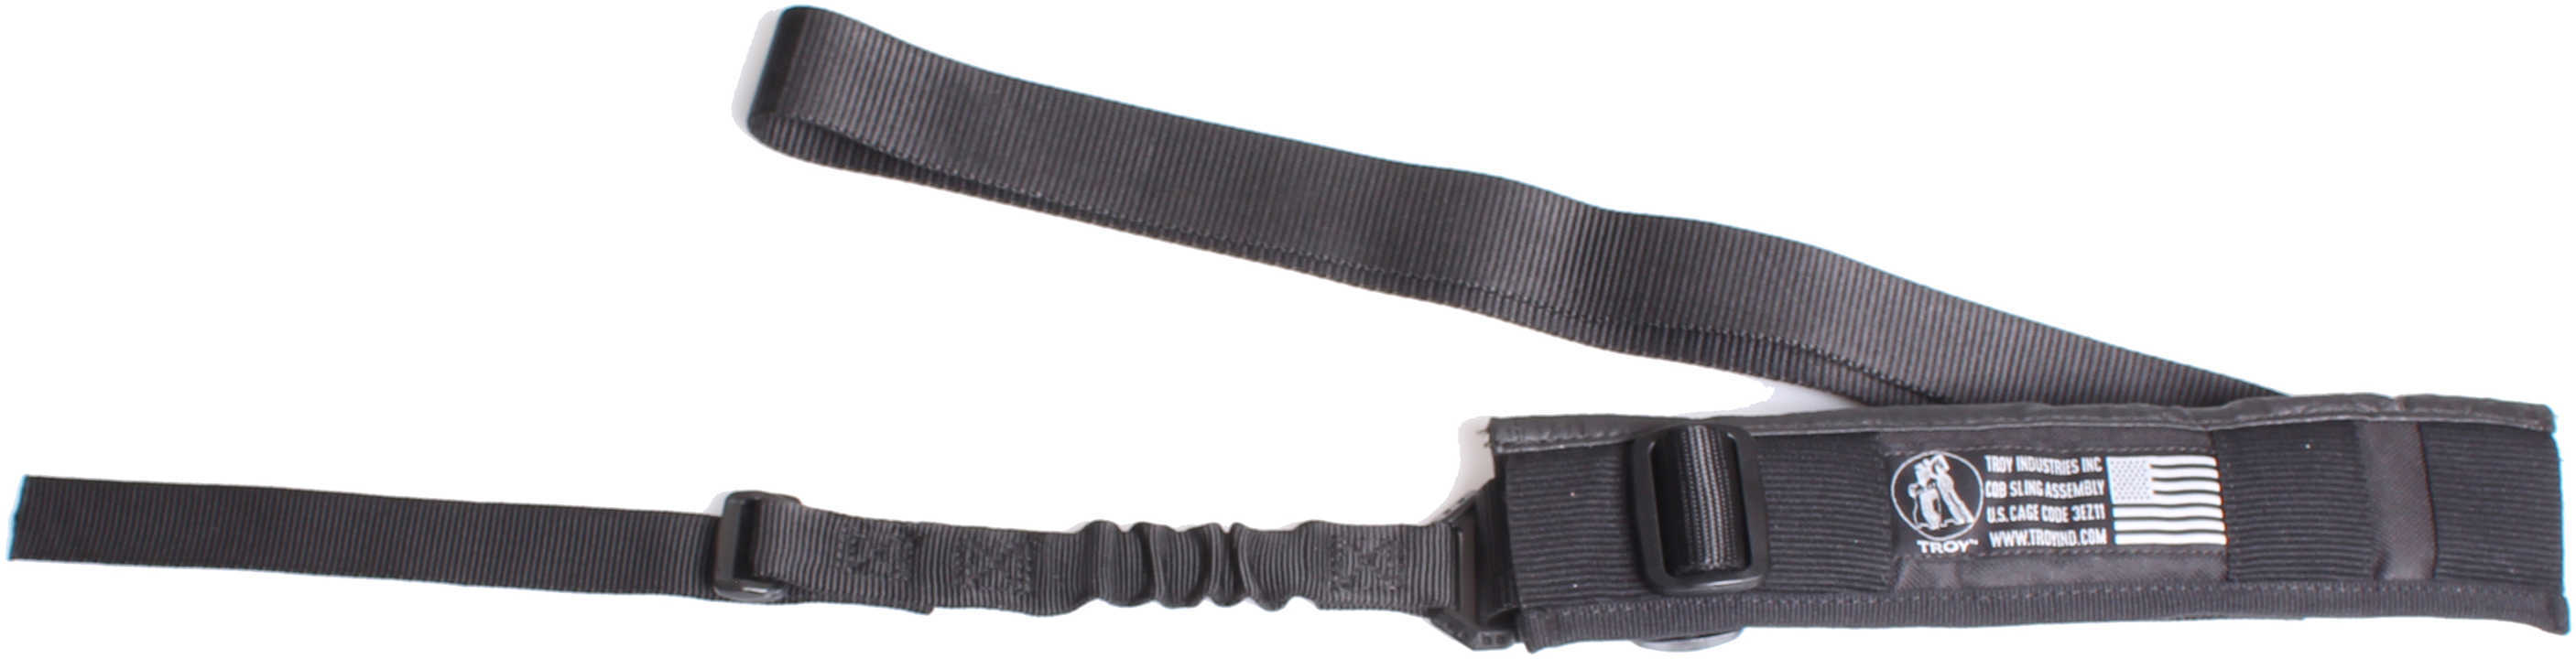 Troy Black One Point Sling Md: 1PS00BT00